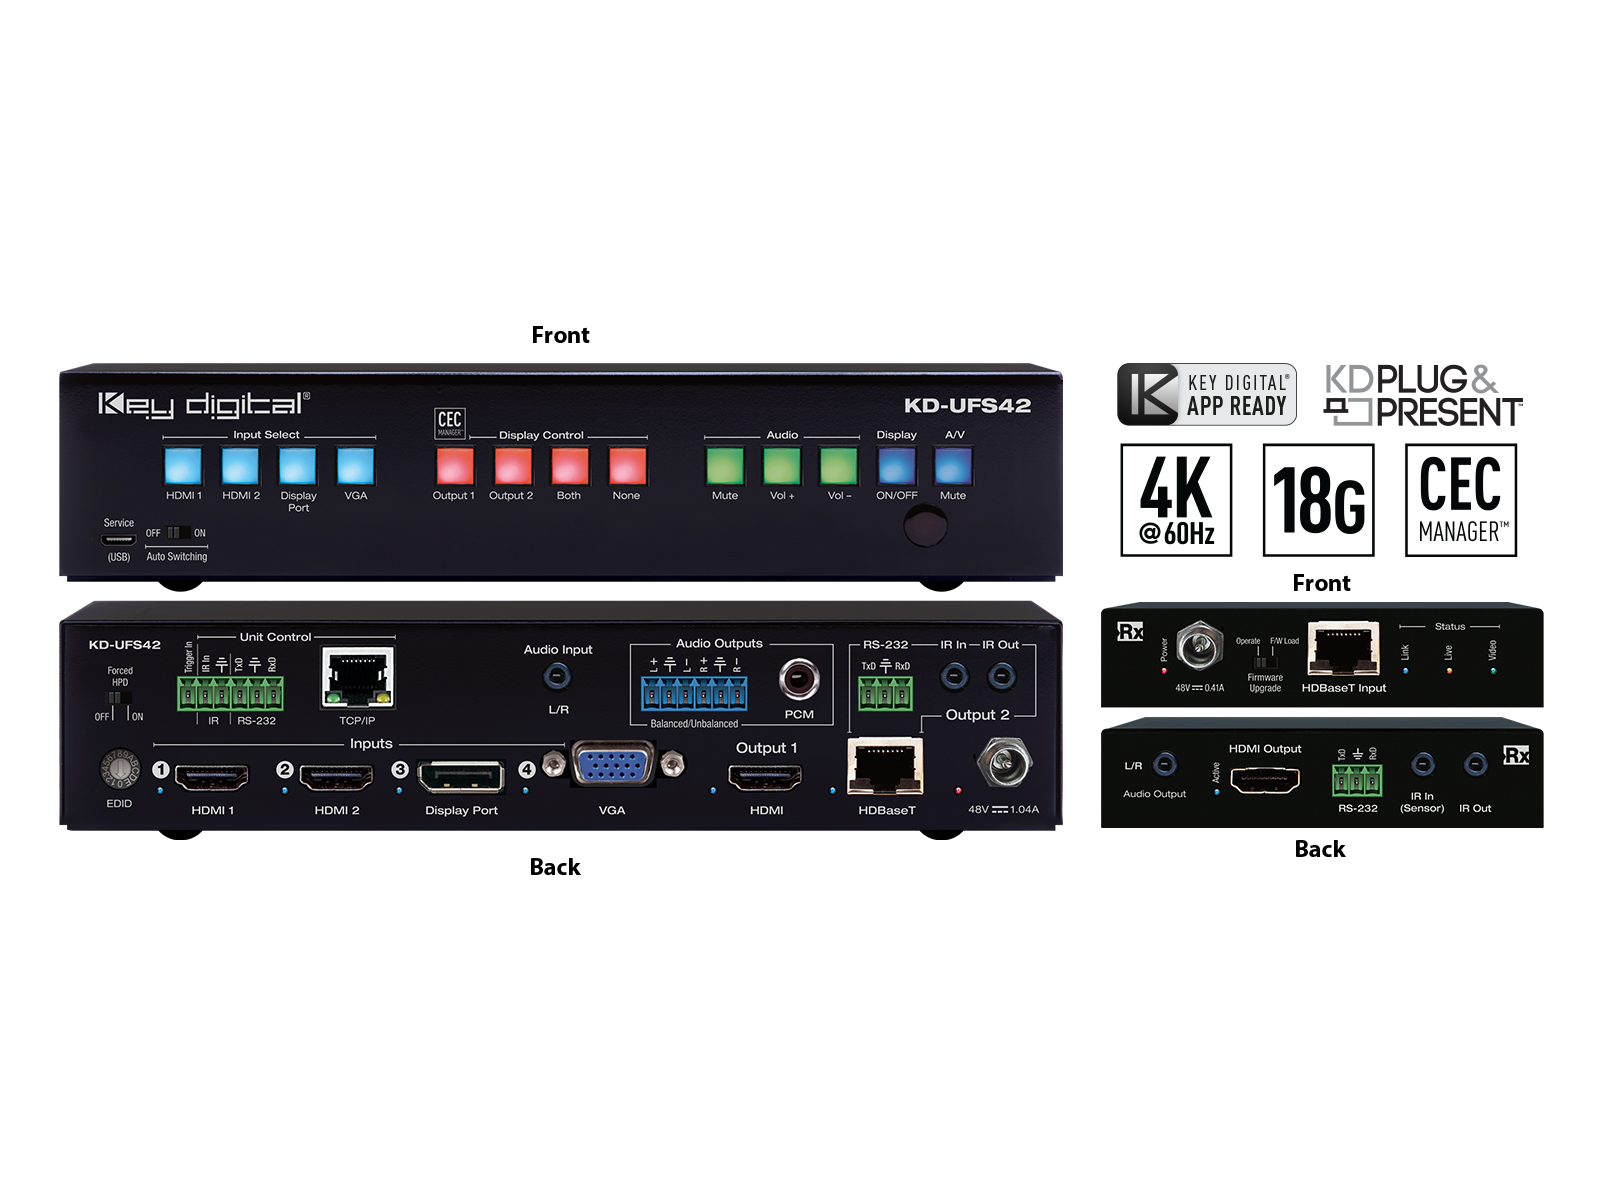 Key Digital KD-UFS42 4x4 4K 18G Universal Format HDMI/DP/VGA Switcher with Mirrored Outputs/CEC/Auto Switching/Receiver Included